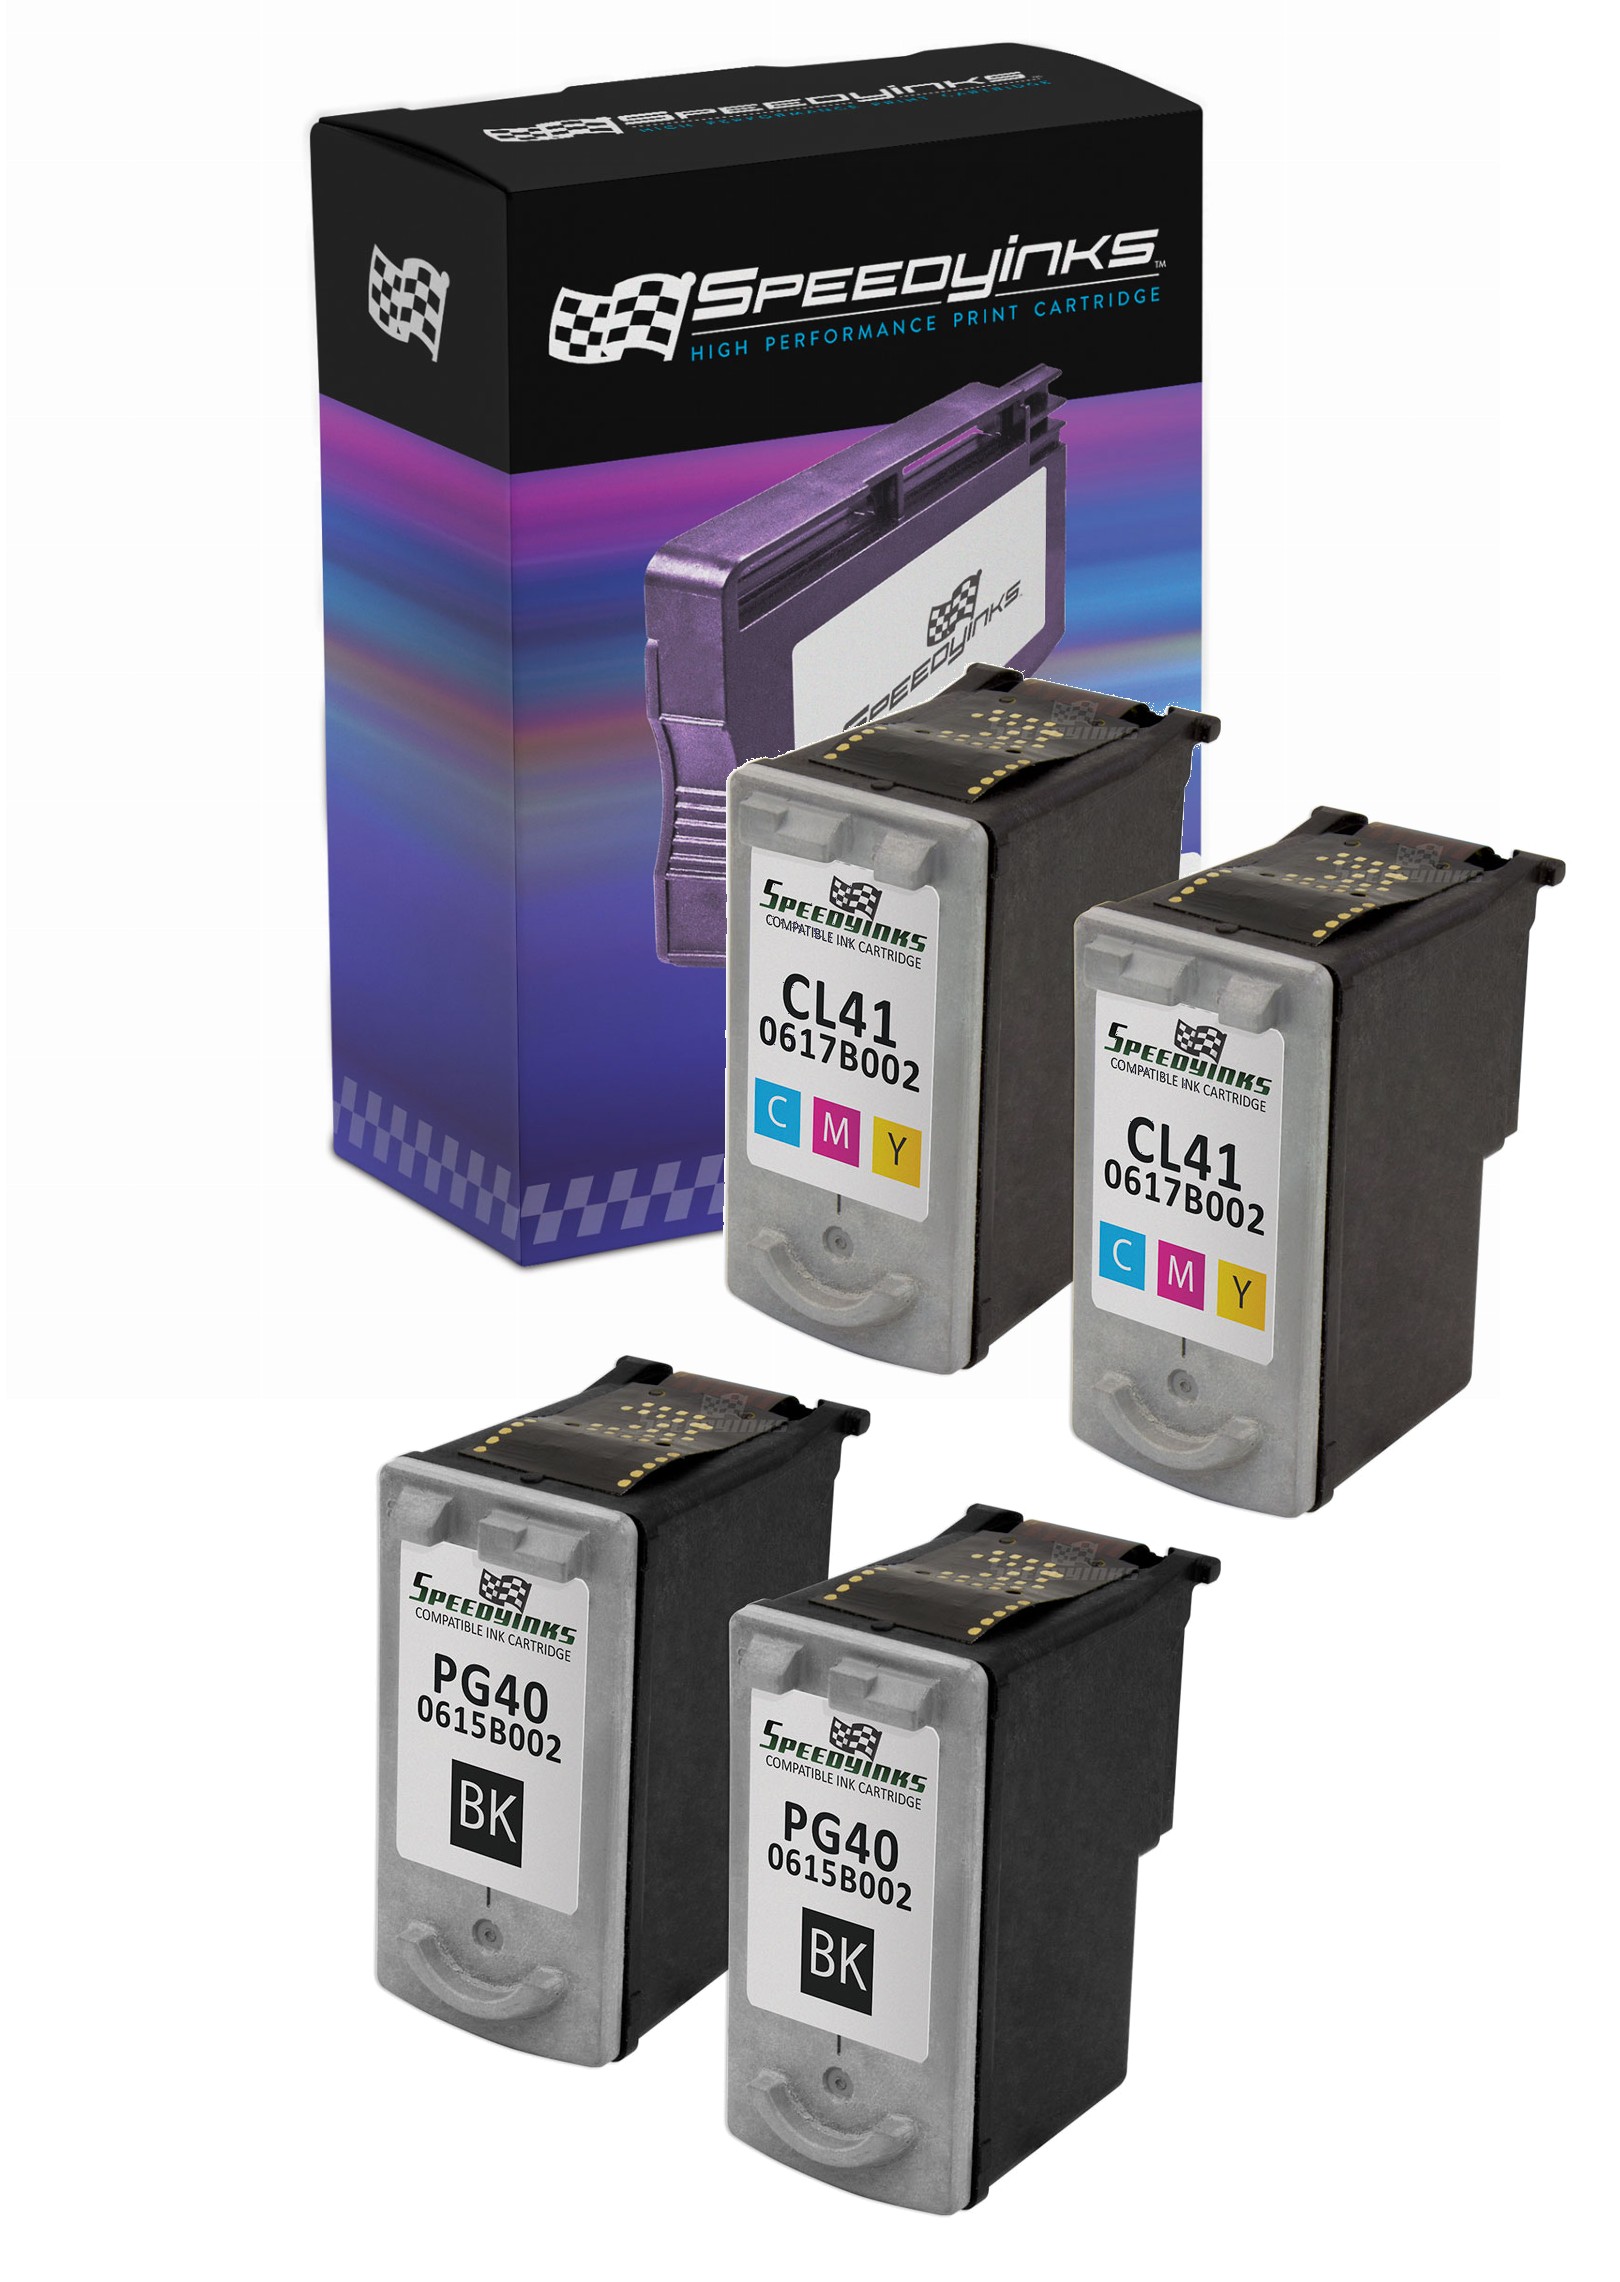 SpeedyInks Remanufactured Cartridge Replacement for Canon PG40 and CL41 (2 Black, 2 Color, 4-Pack) - image 1 of 6